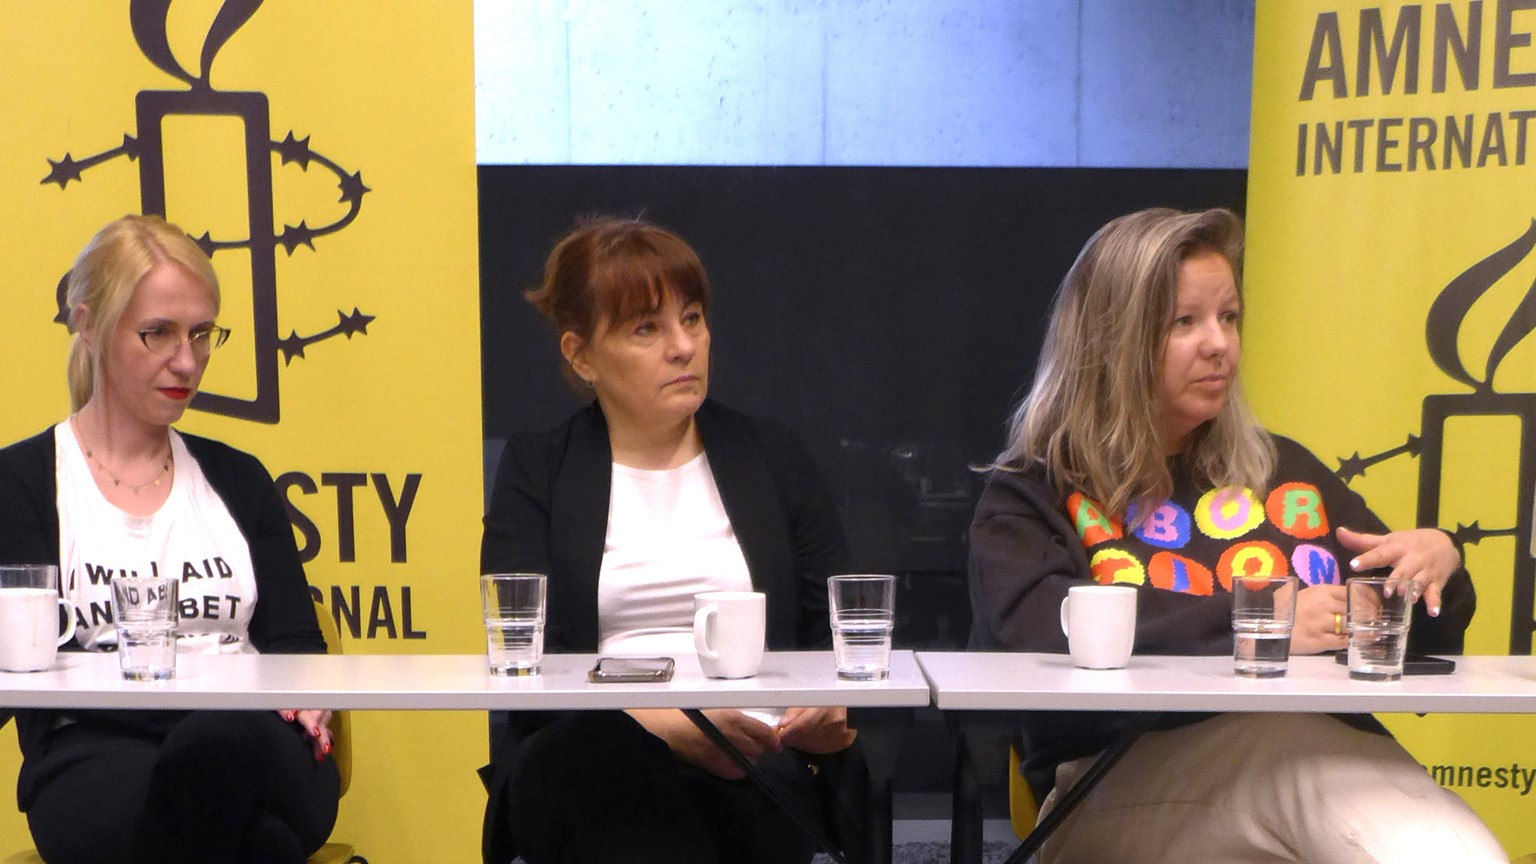 From left, members of the organization Abortion Dream Team Kinga Jelinska, Justyna Wydrzynska and Natalia Broniarczyk speak during a media conference in Brussels, Thursday, March 23, 2023. Justyna Wyd ...